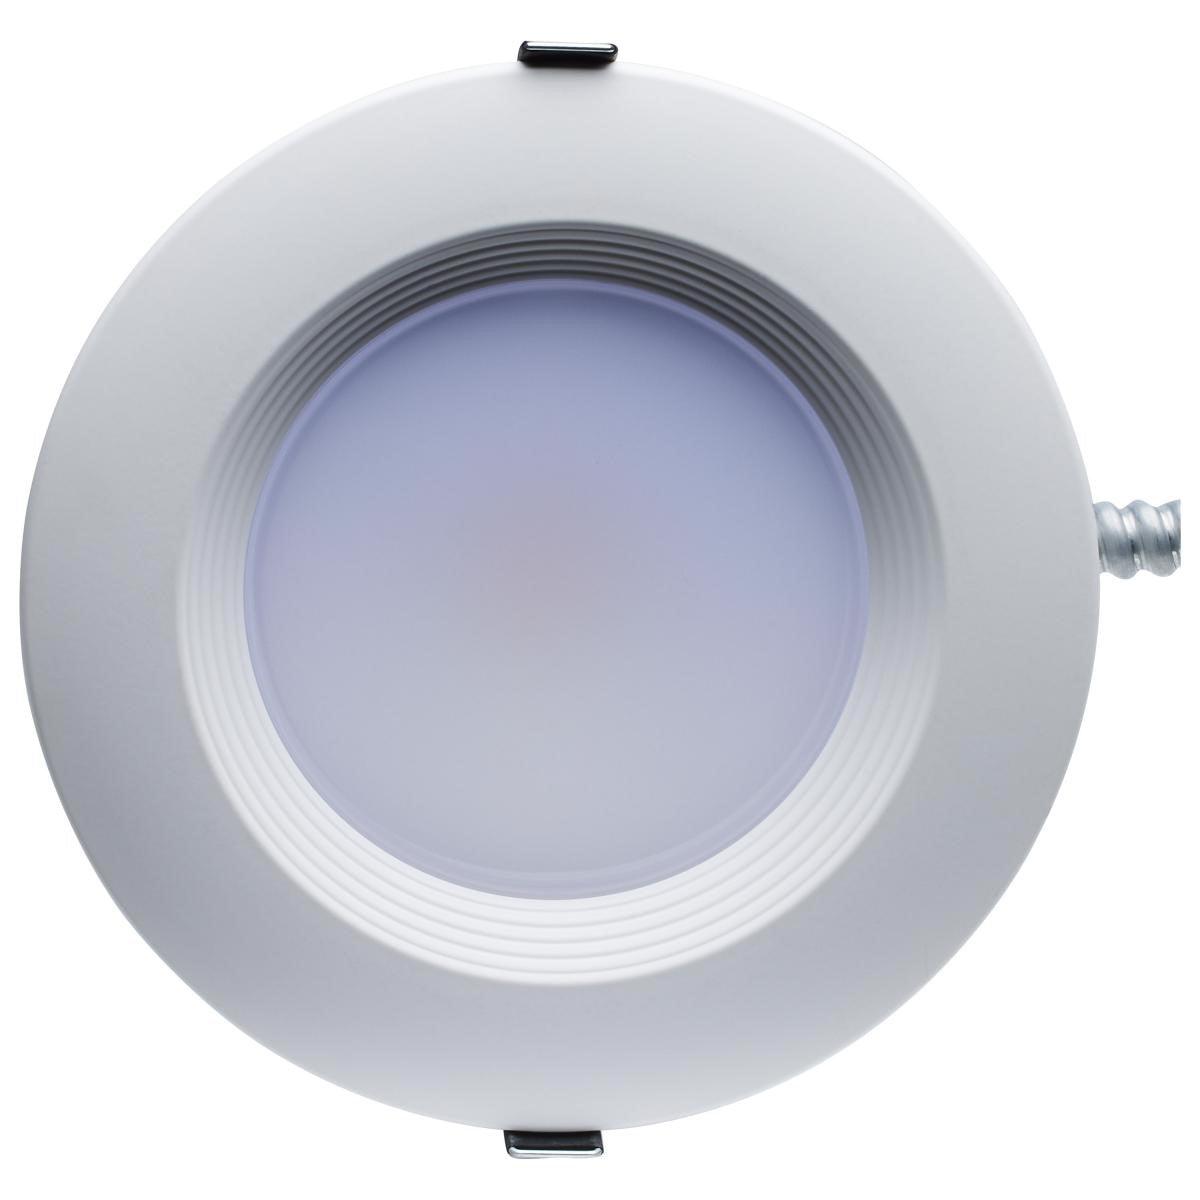 6 Inch Commercial LED Downlight, Round, 15 Watt, 1600 Lumens, Selectable CCT, 2700K to 5000K, Baffle Trim